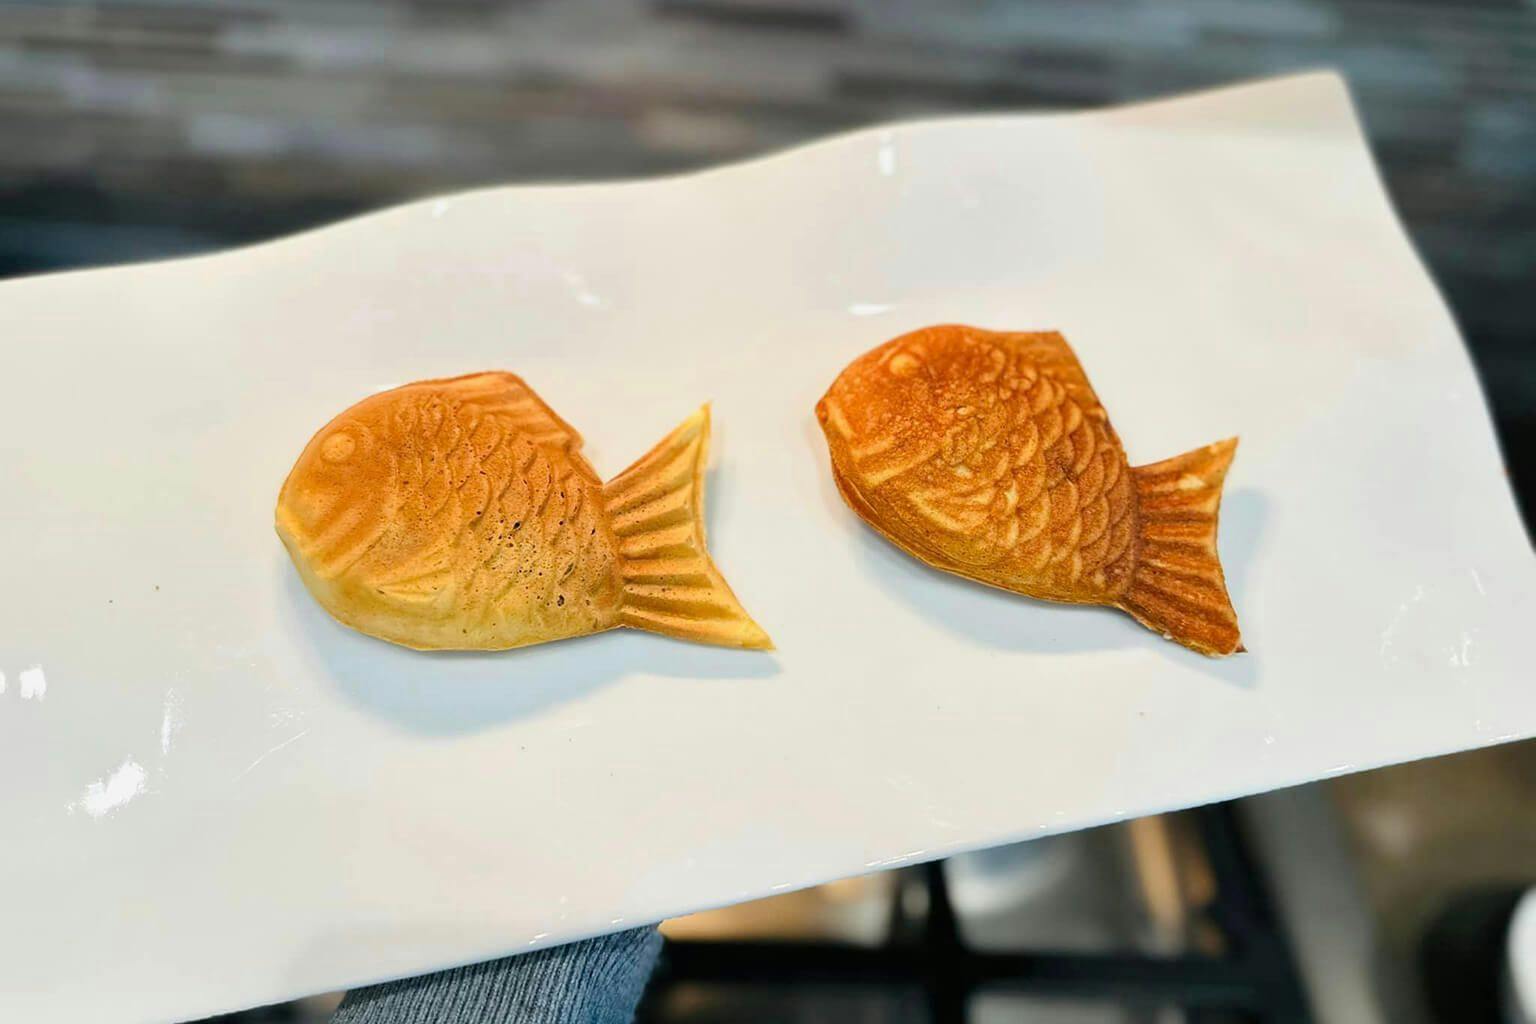 Two taiyaki that are cooking different time lengthes